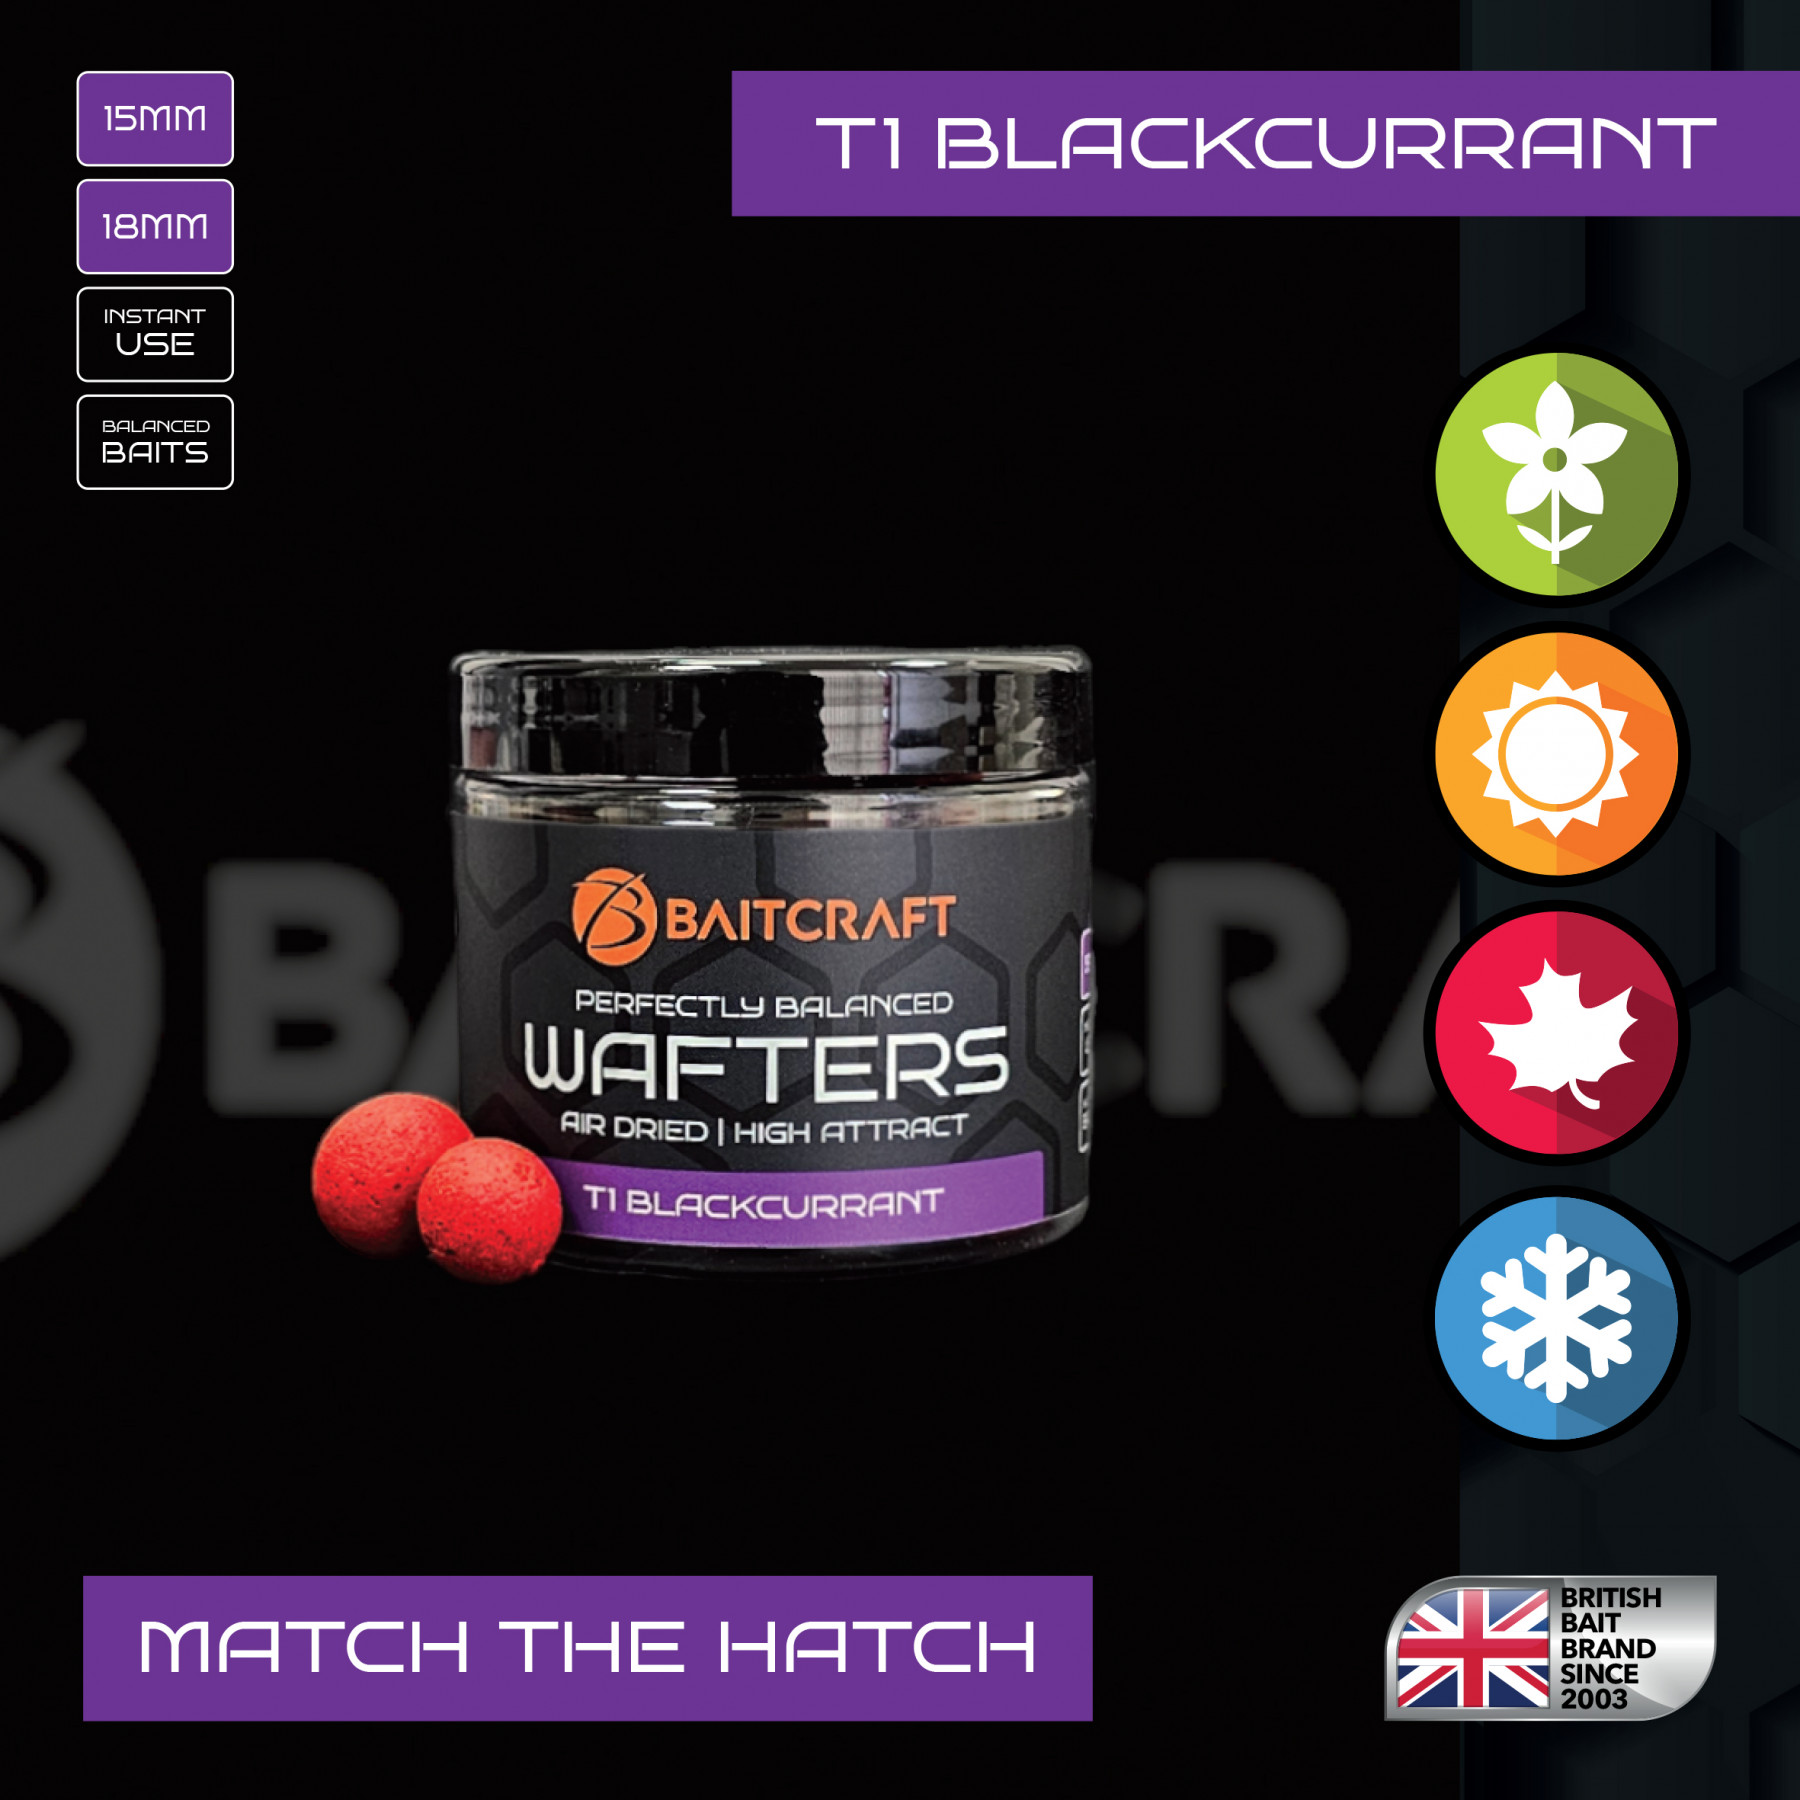 BAITCRAFT T1 BLACKCURRANT MATCH THE HATCH WAFTERS